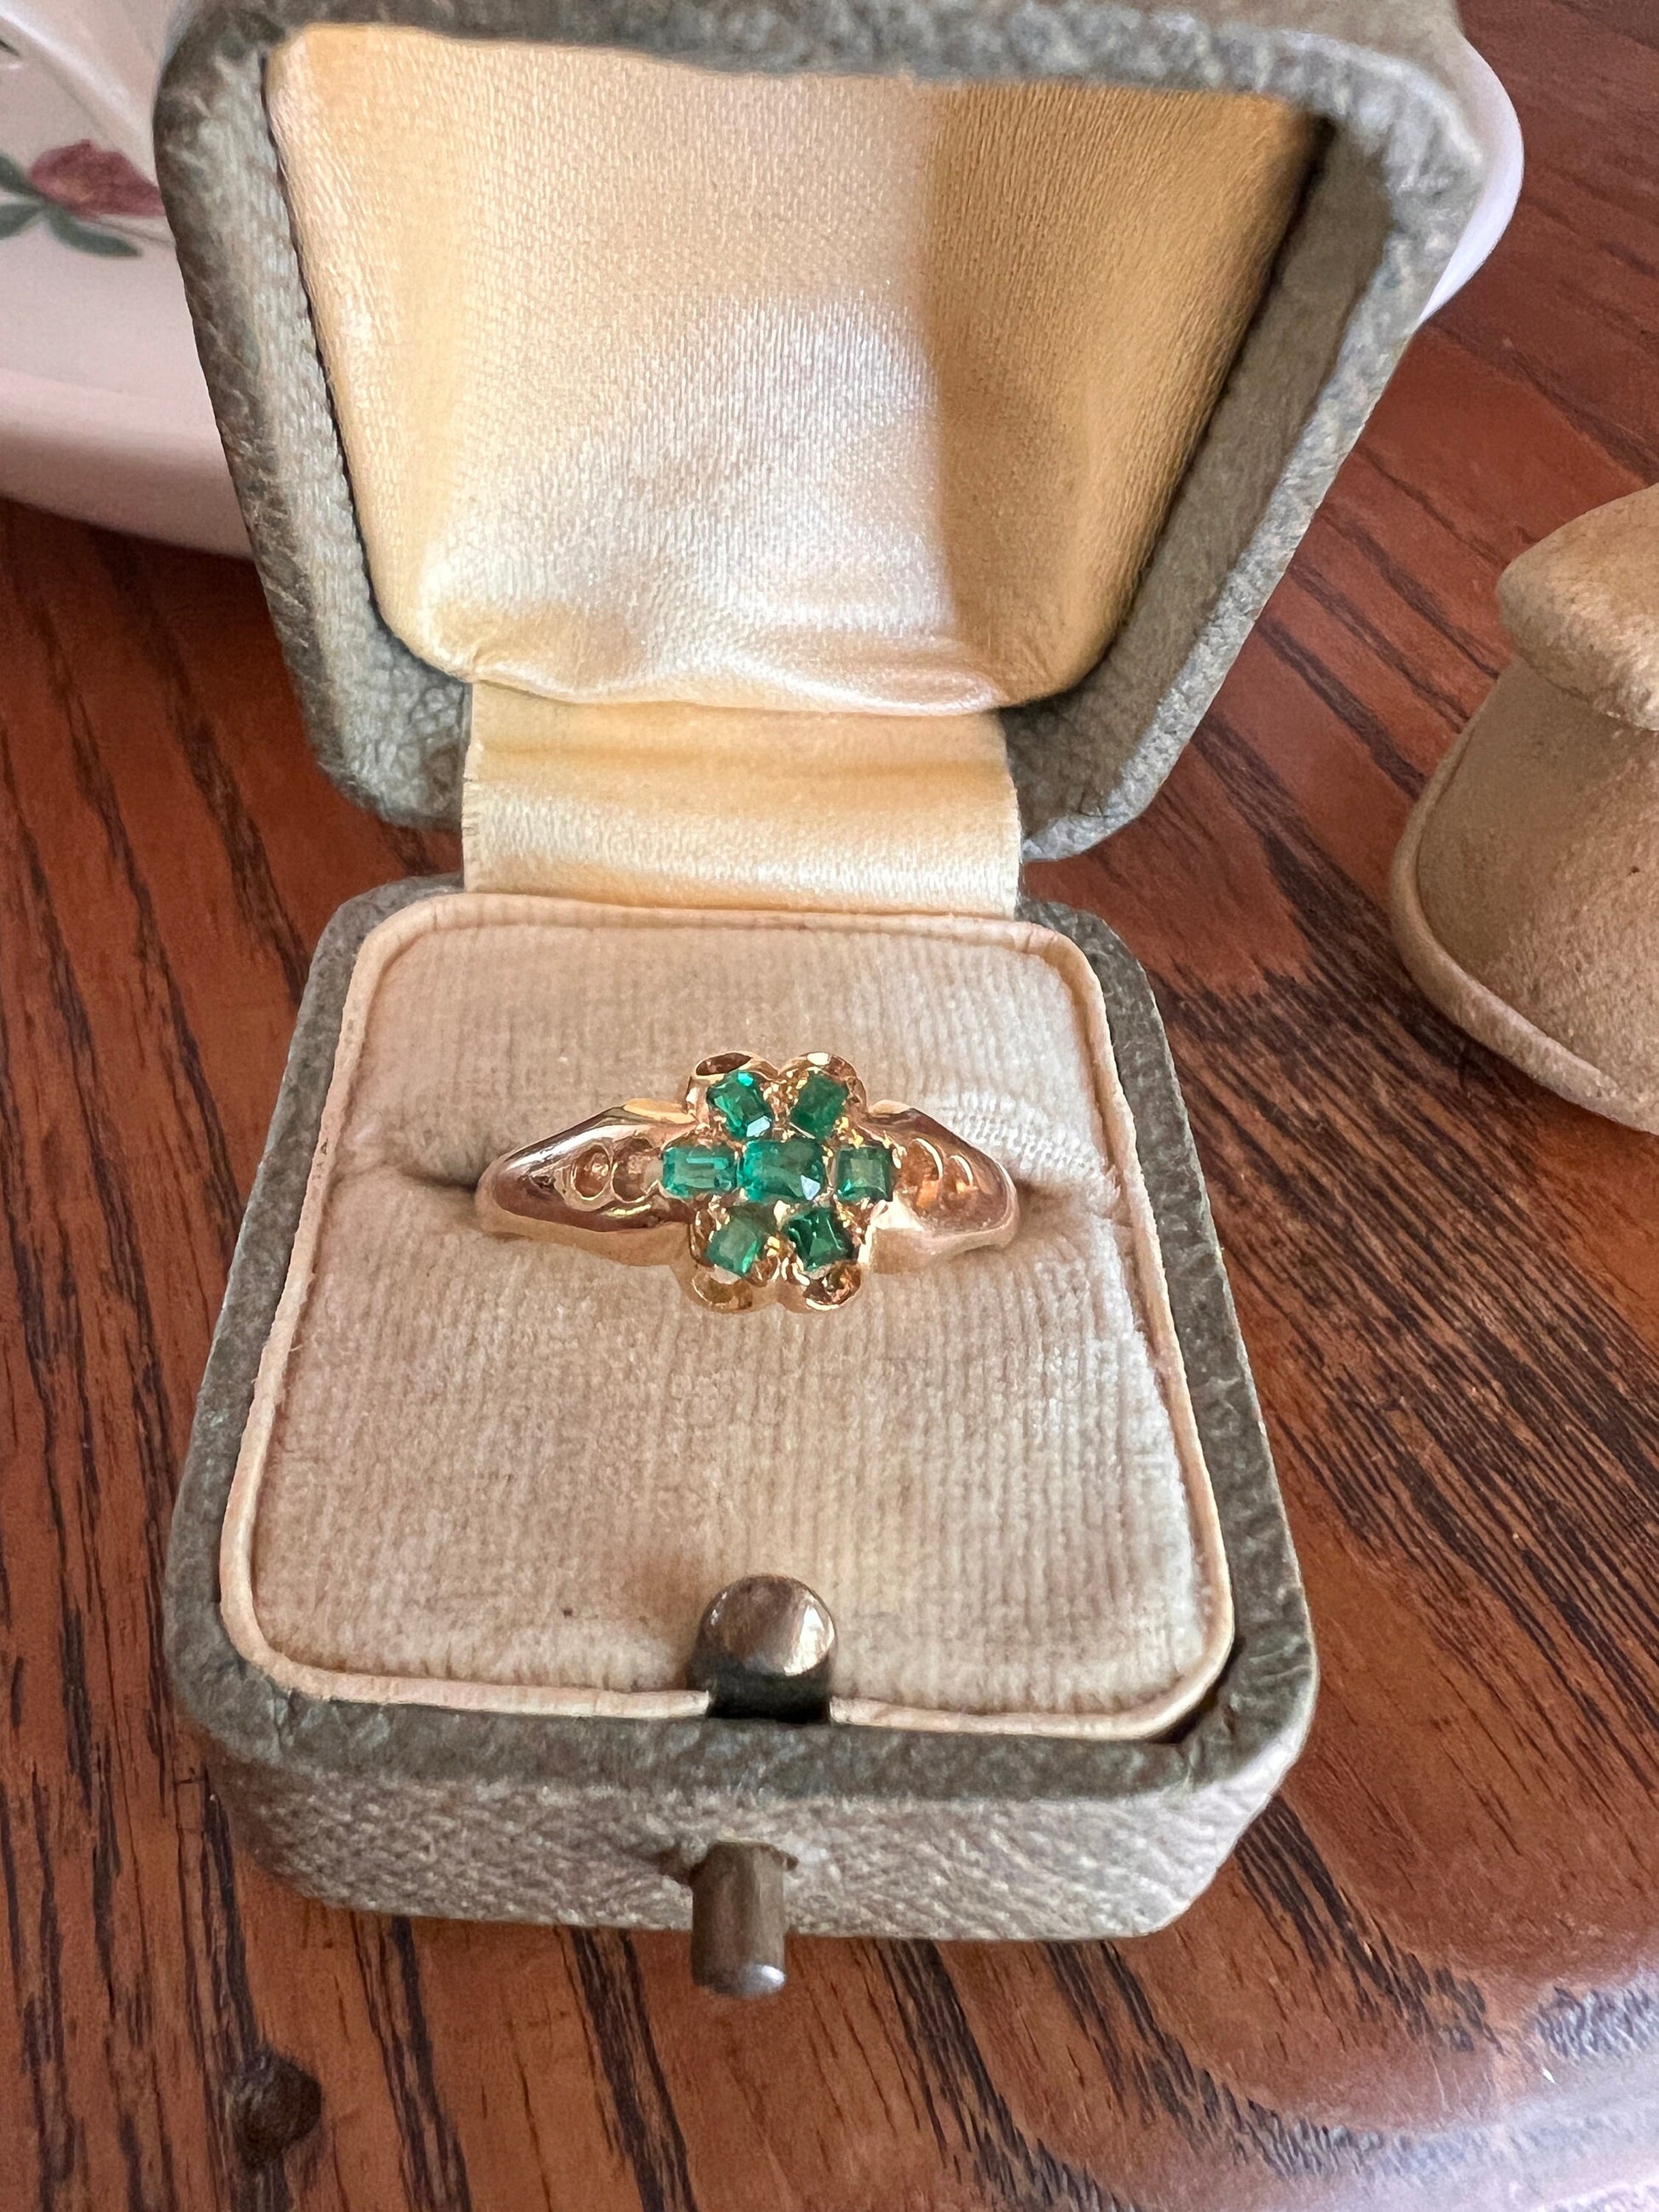 STARBURST Antique c1924 15k GOLD Band Stacker Green Romantic Gift Skinny Layering Art Deco Later Dated Engraved "David 1967" Unique